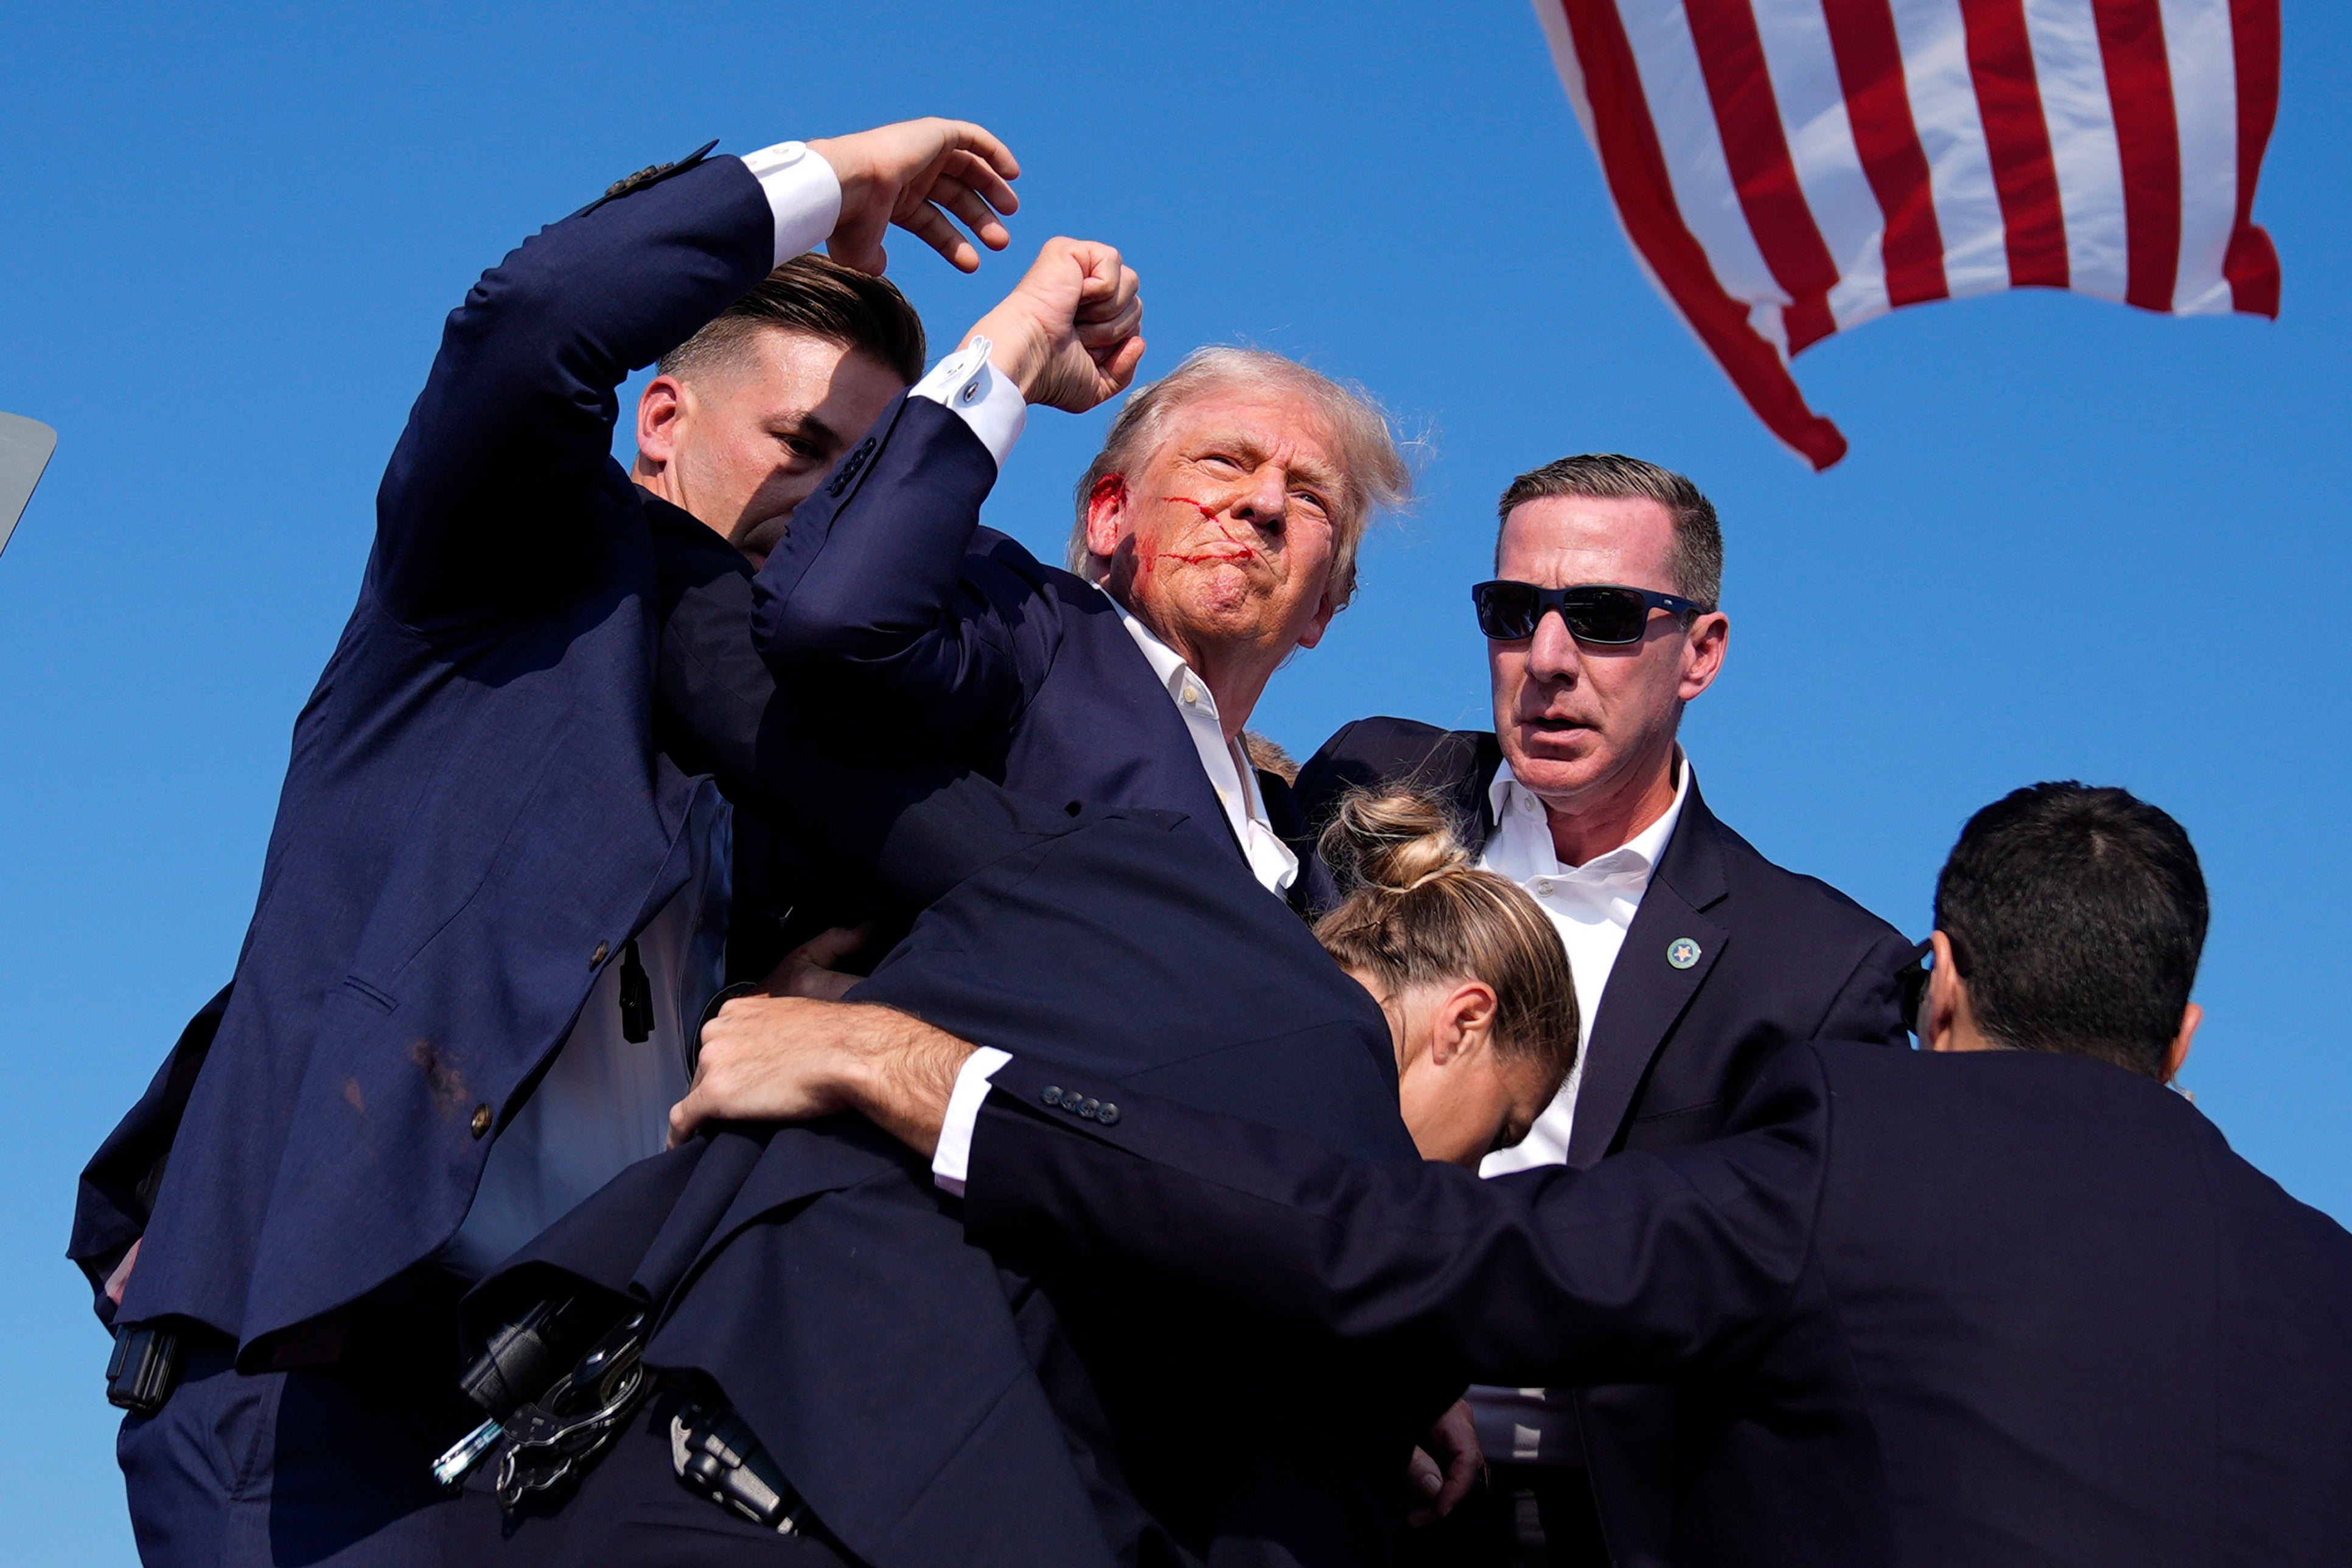 Trump raises his fist in the air to show he's OK after an assassination attempt was made at his campaign rally in Butler, Pennsylvania. A GoFundMe campaign he authorized has raised nearly $2 million for the victims.